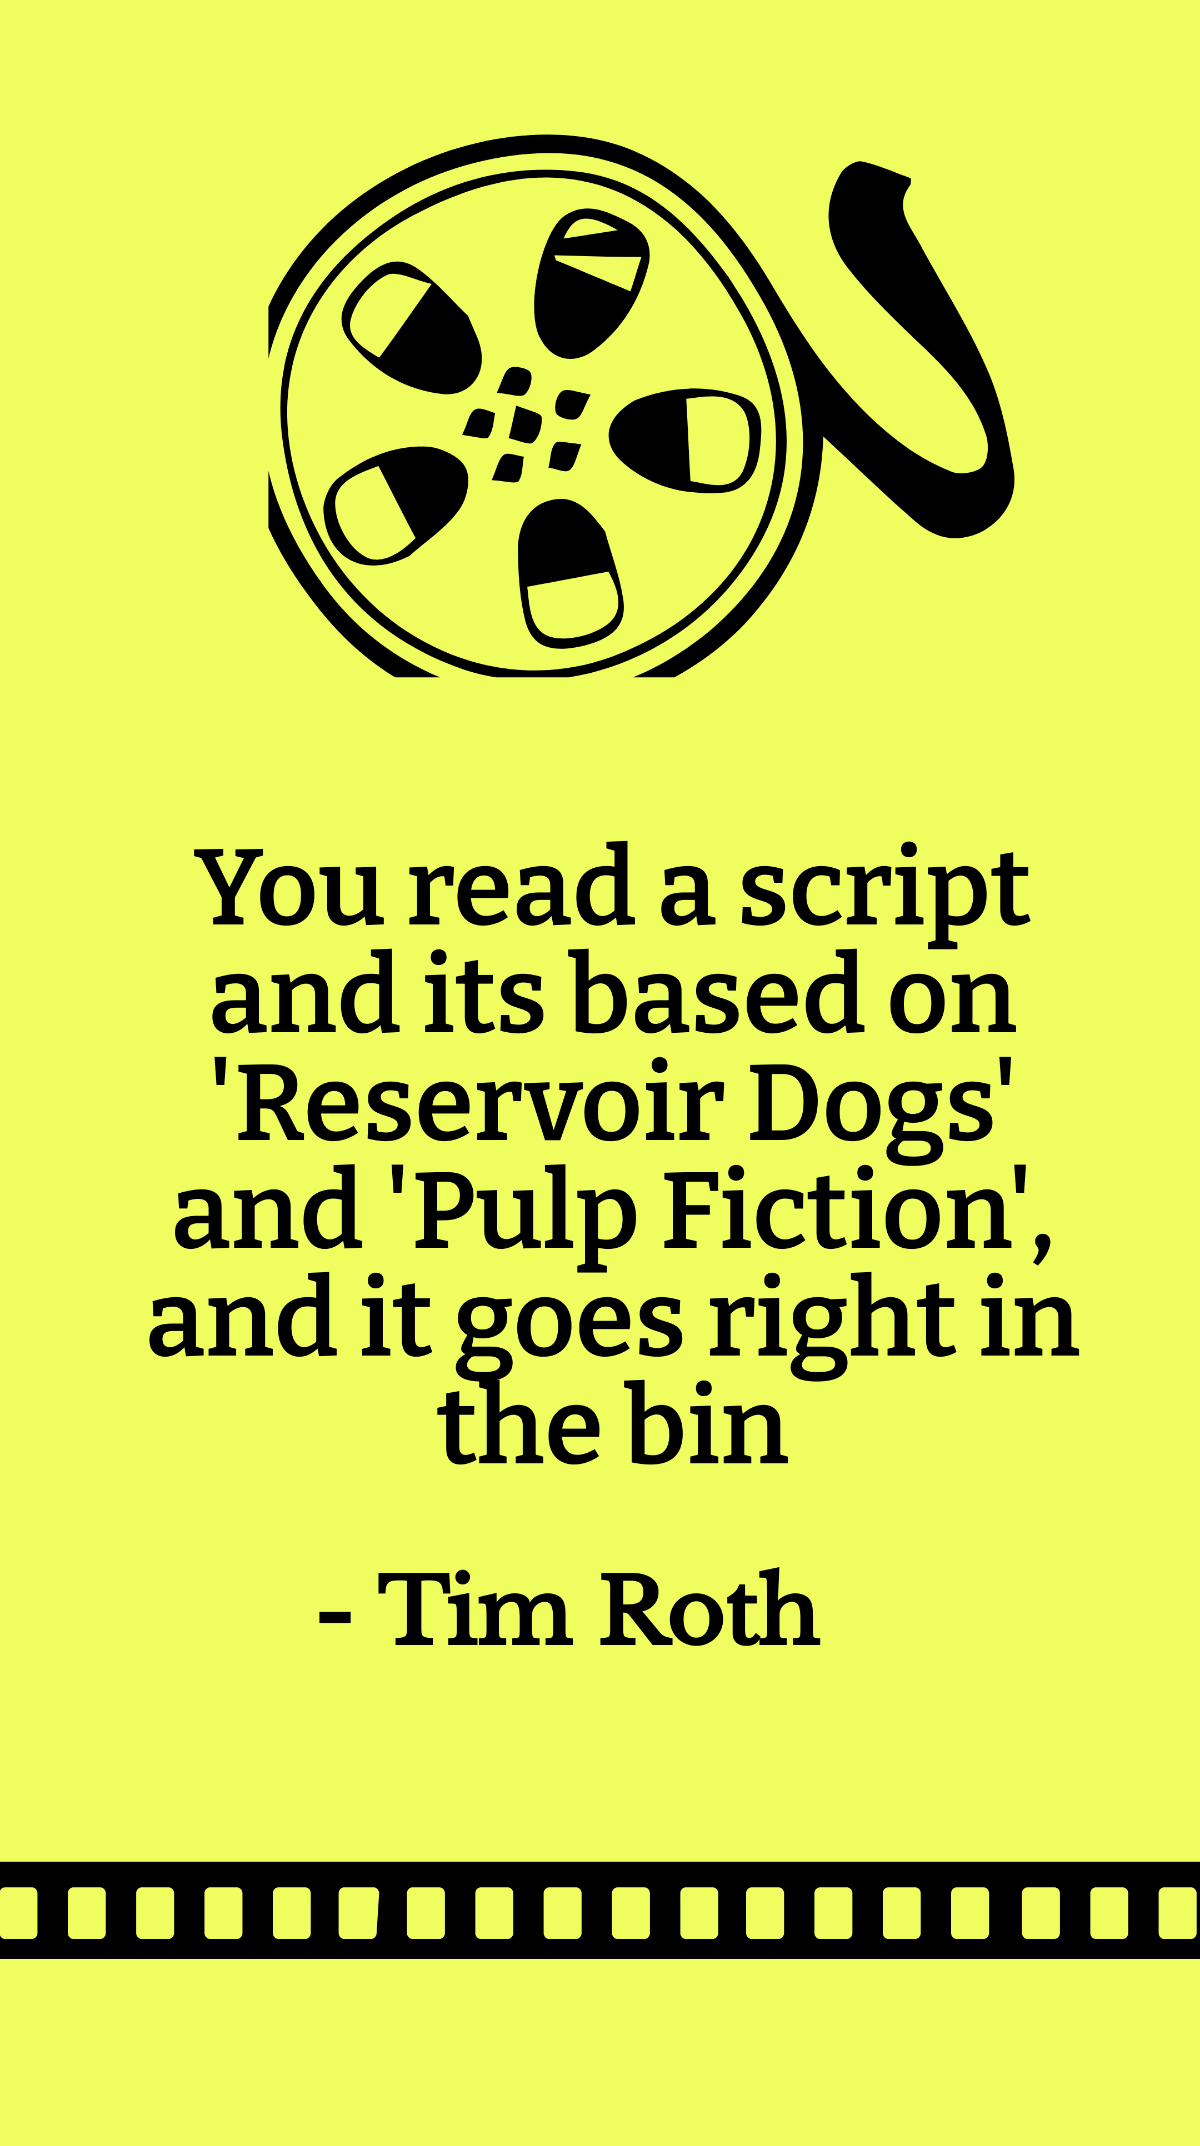 Tim Roth - You read a script and its based on 'Reservoir Dogs' and 'Pulp Fiction', and it goes right in the bin